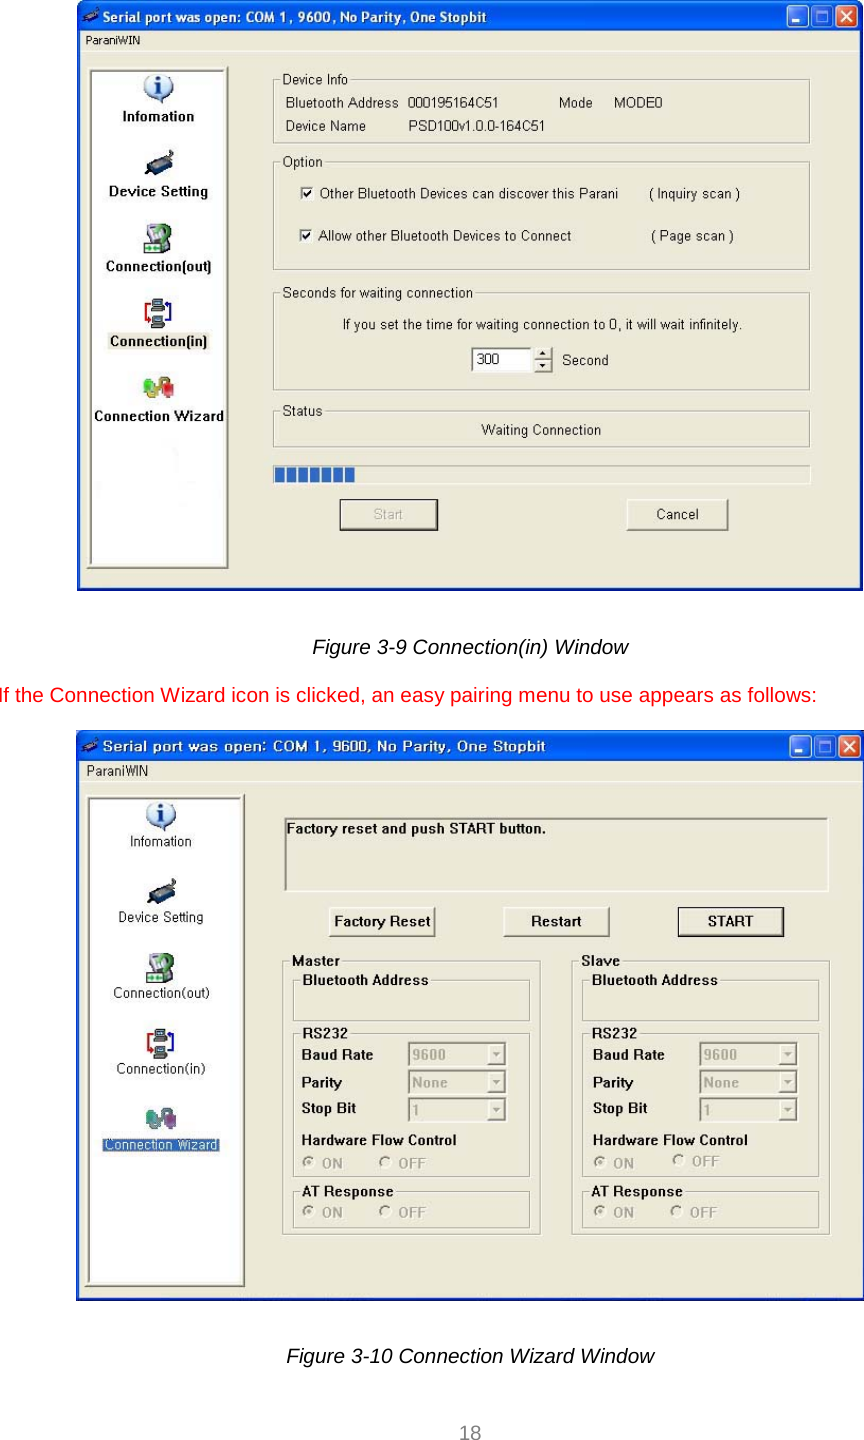  18   Figure 3-9 Connection(in) Window  If the Connection Wizard icon is clicked, an easy pairing menu to use appears as follows:    Figure 3-10 Connection Wizard Window 